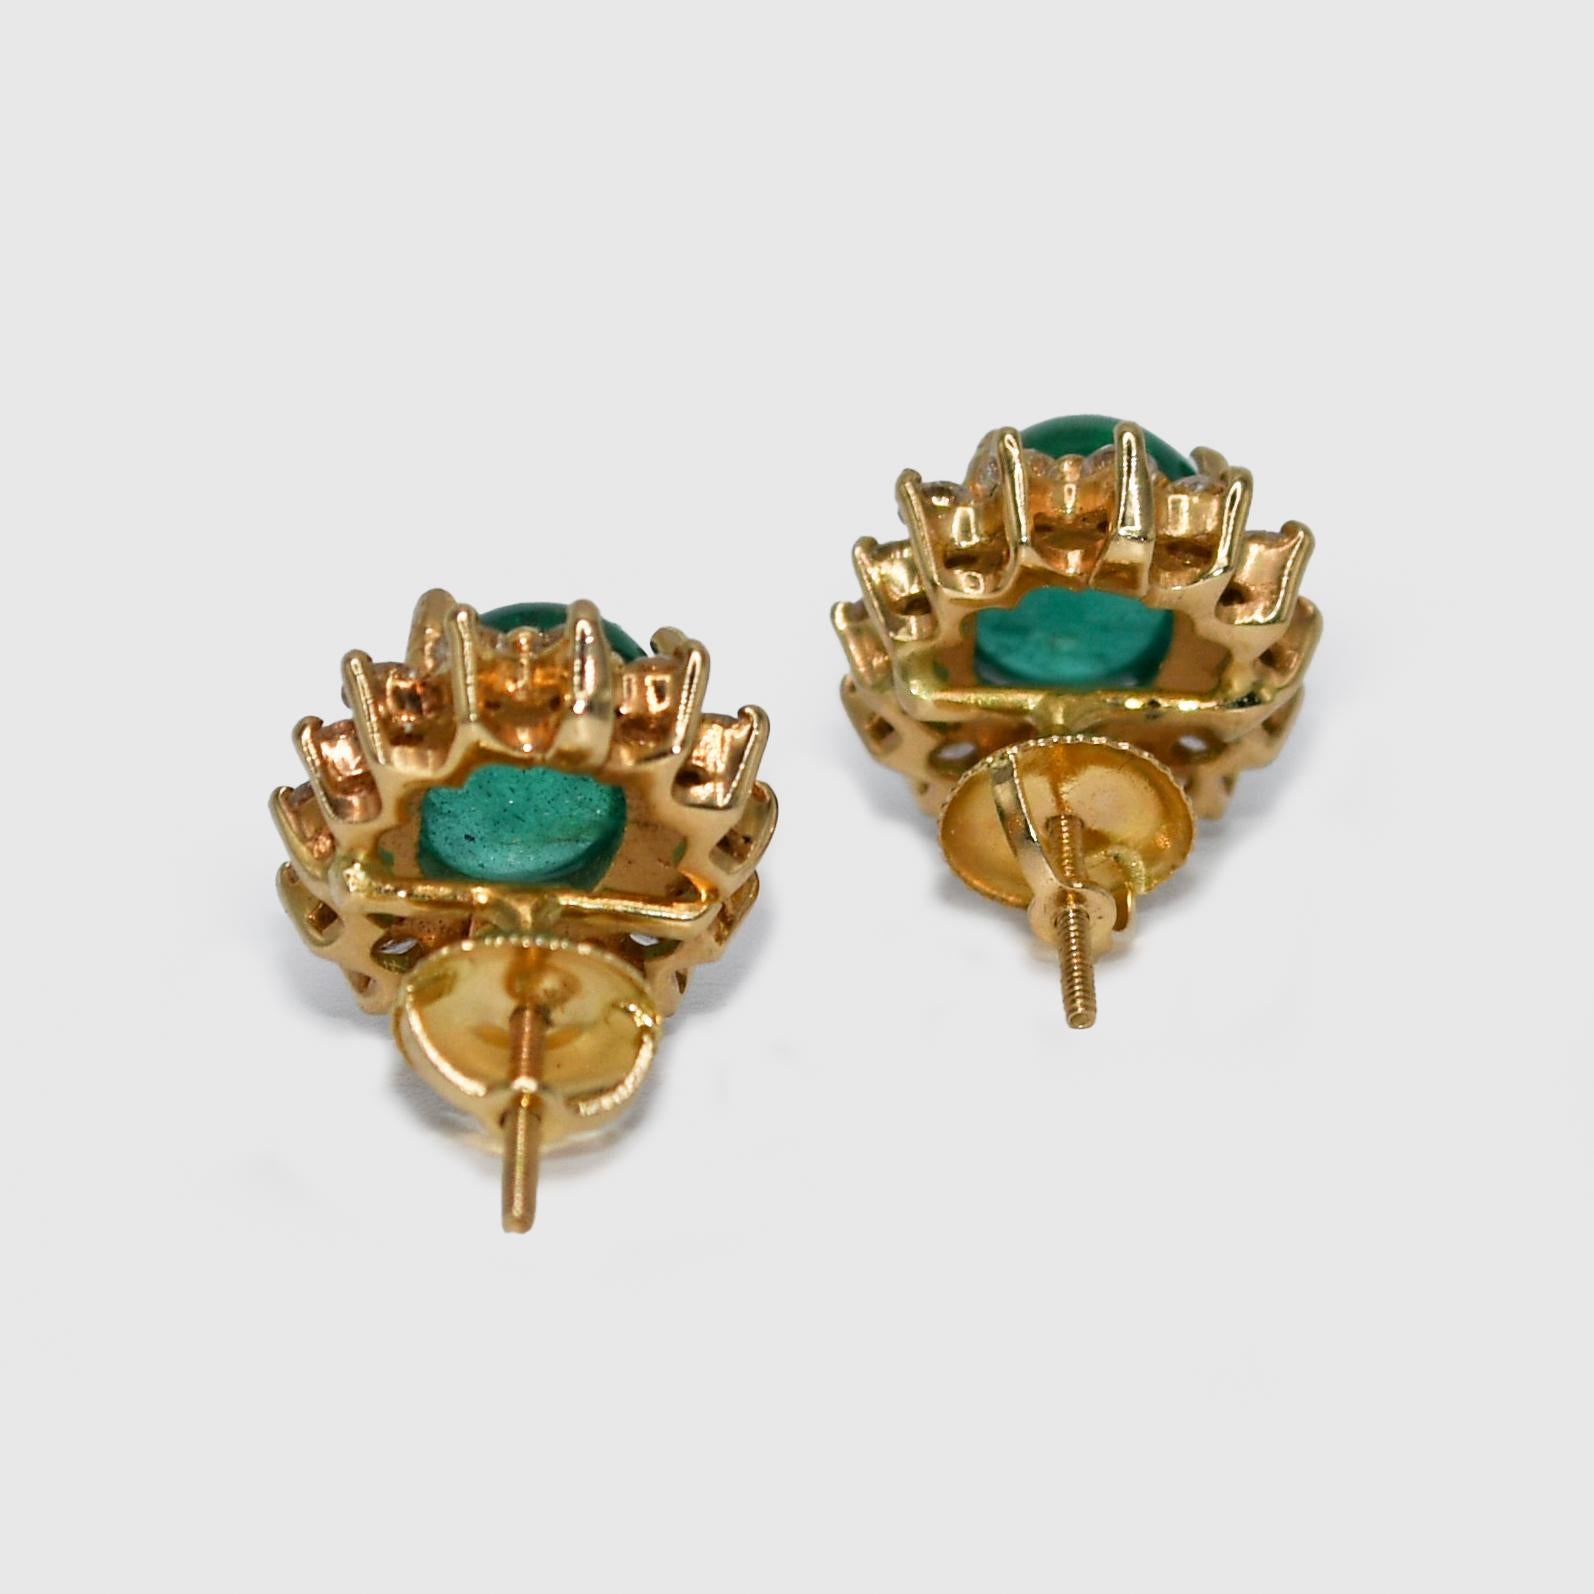 14K Yellow Gold Cabochon Emerald & Diamond Earrings 4.8g In Excellent Condition For Sale In Laguna Beach, CA